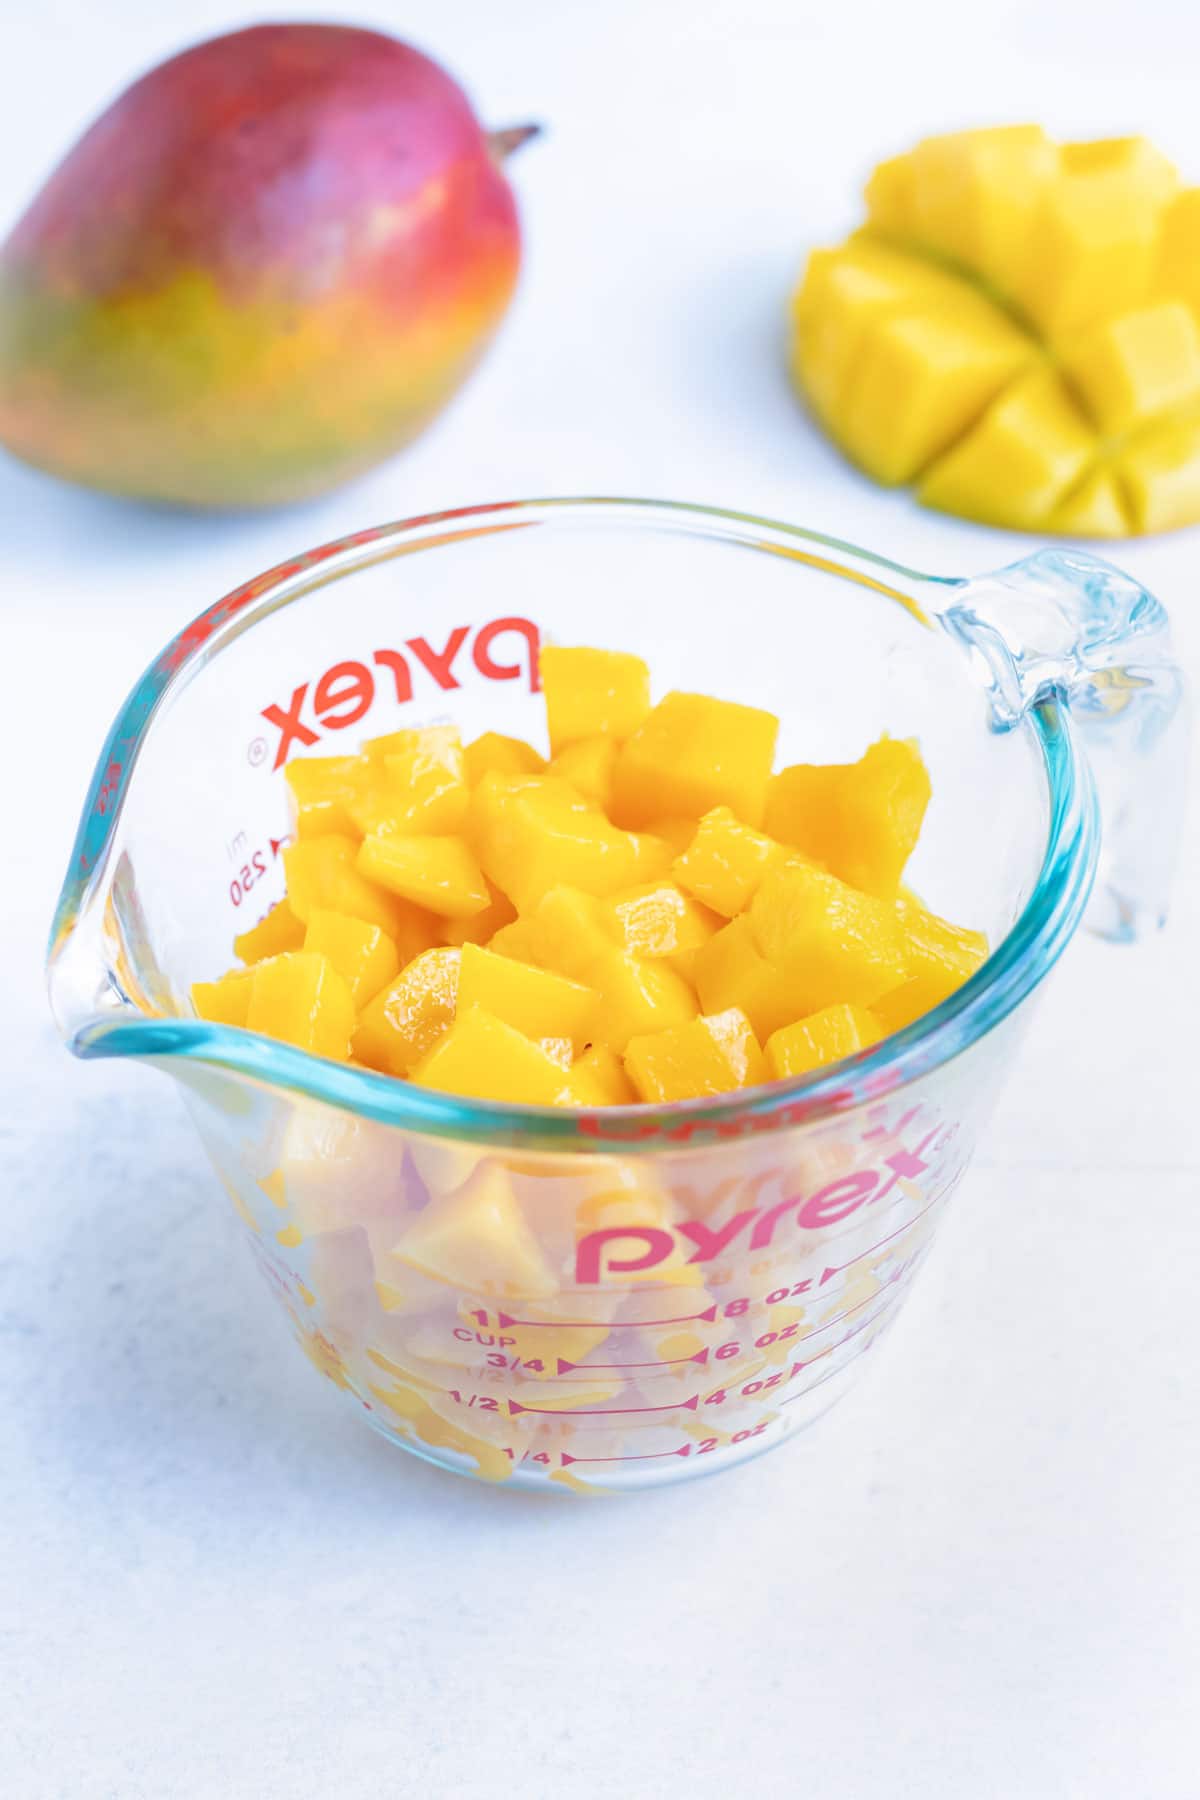 A measuring cup full of freshly cut mango showing that one medium mango equals roughly 1 1/2 cups of fruit.